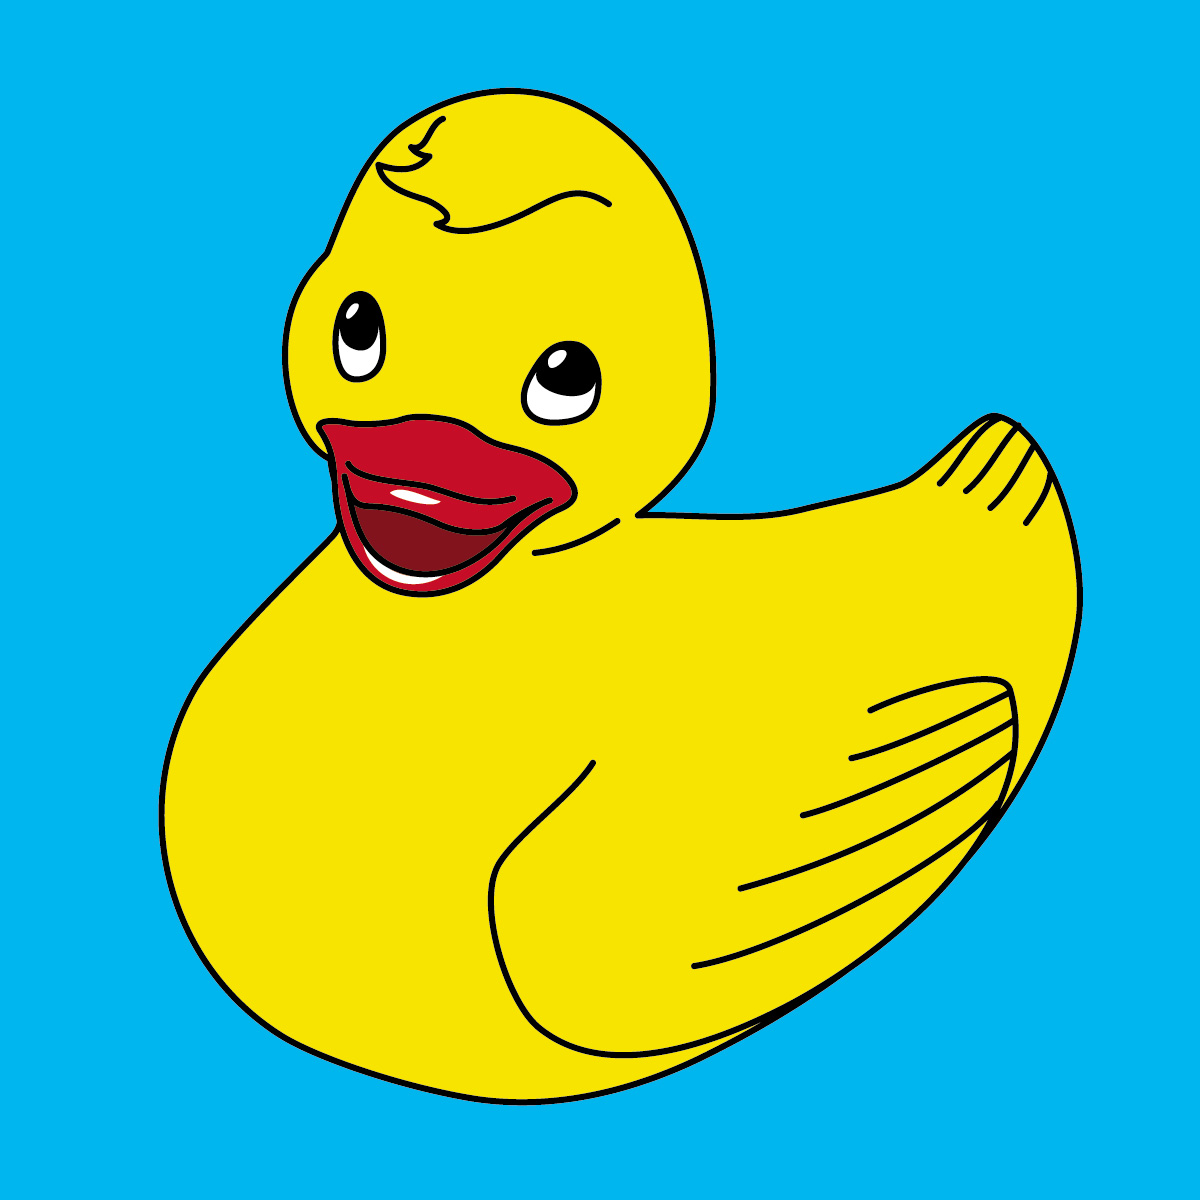 Free Rubber Ducky Image, Download Free Rubber Ducky Image png images